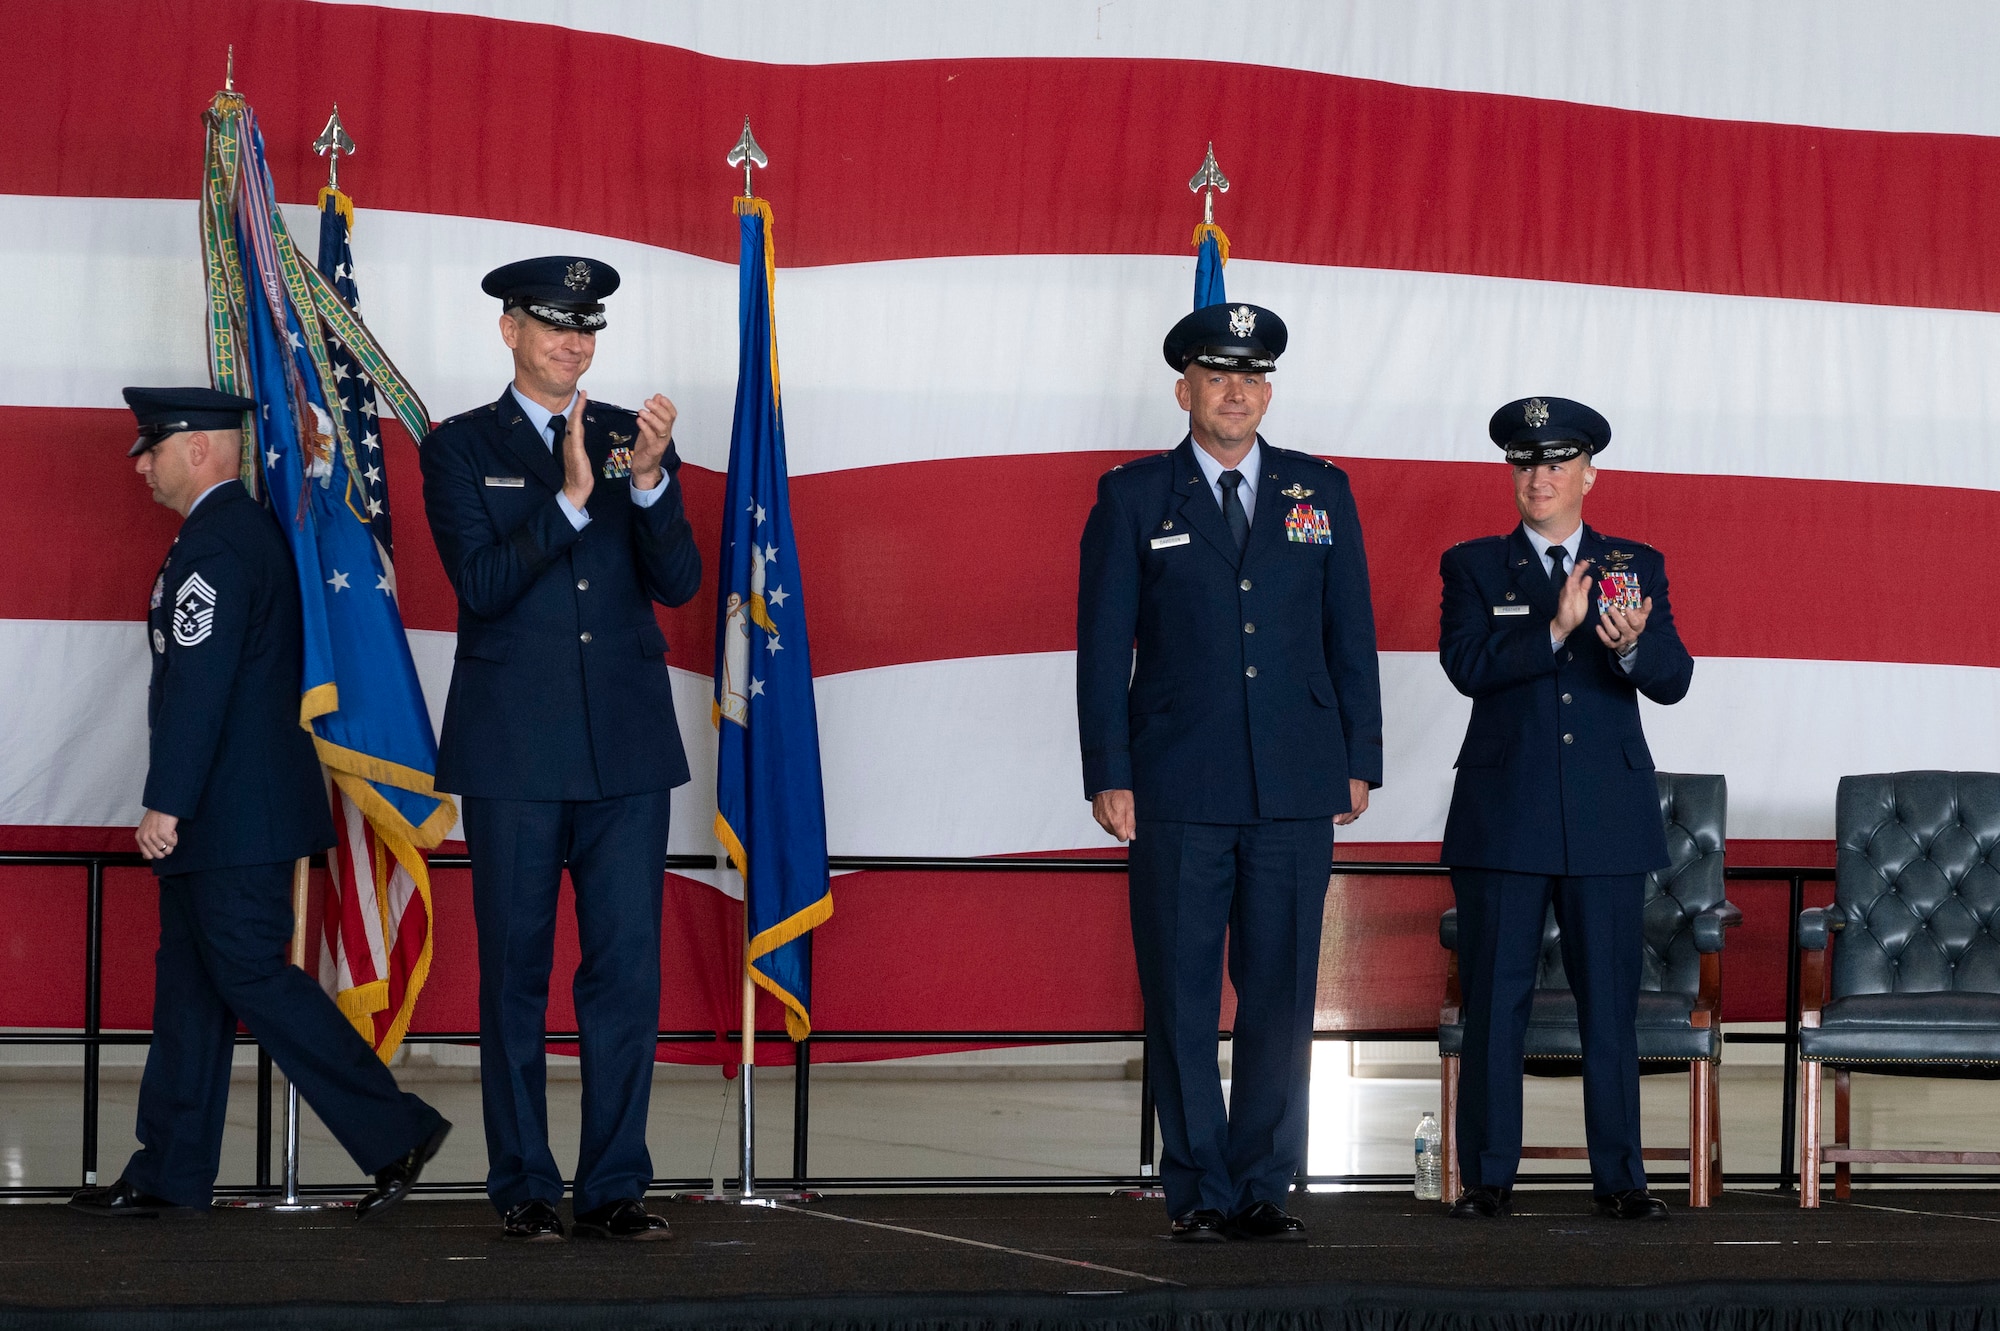 U.S. Air Force Col. Kevin Davidson stands at attention after becoming the 47th Flying Training Wing commander at the 47th Flying Training Wing change of command ceremony at Laughlin Air Force Base, Texas, July 22, 2022. As commander, Davidson will oversee nearly 2,800 military and civilian personnel engaged in executing more than 61,000 aircraft sorties yearly in support of Laughlin's Specialized Undergraduate Pilot Training mission. (U.S. Air Force photo by Airman 1st Class Kailee Reynolds)